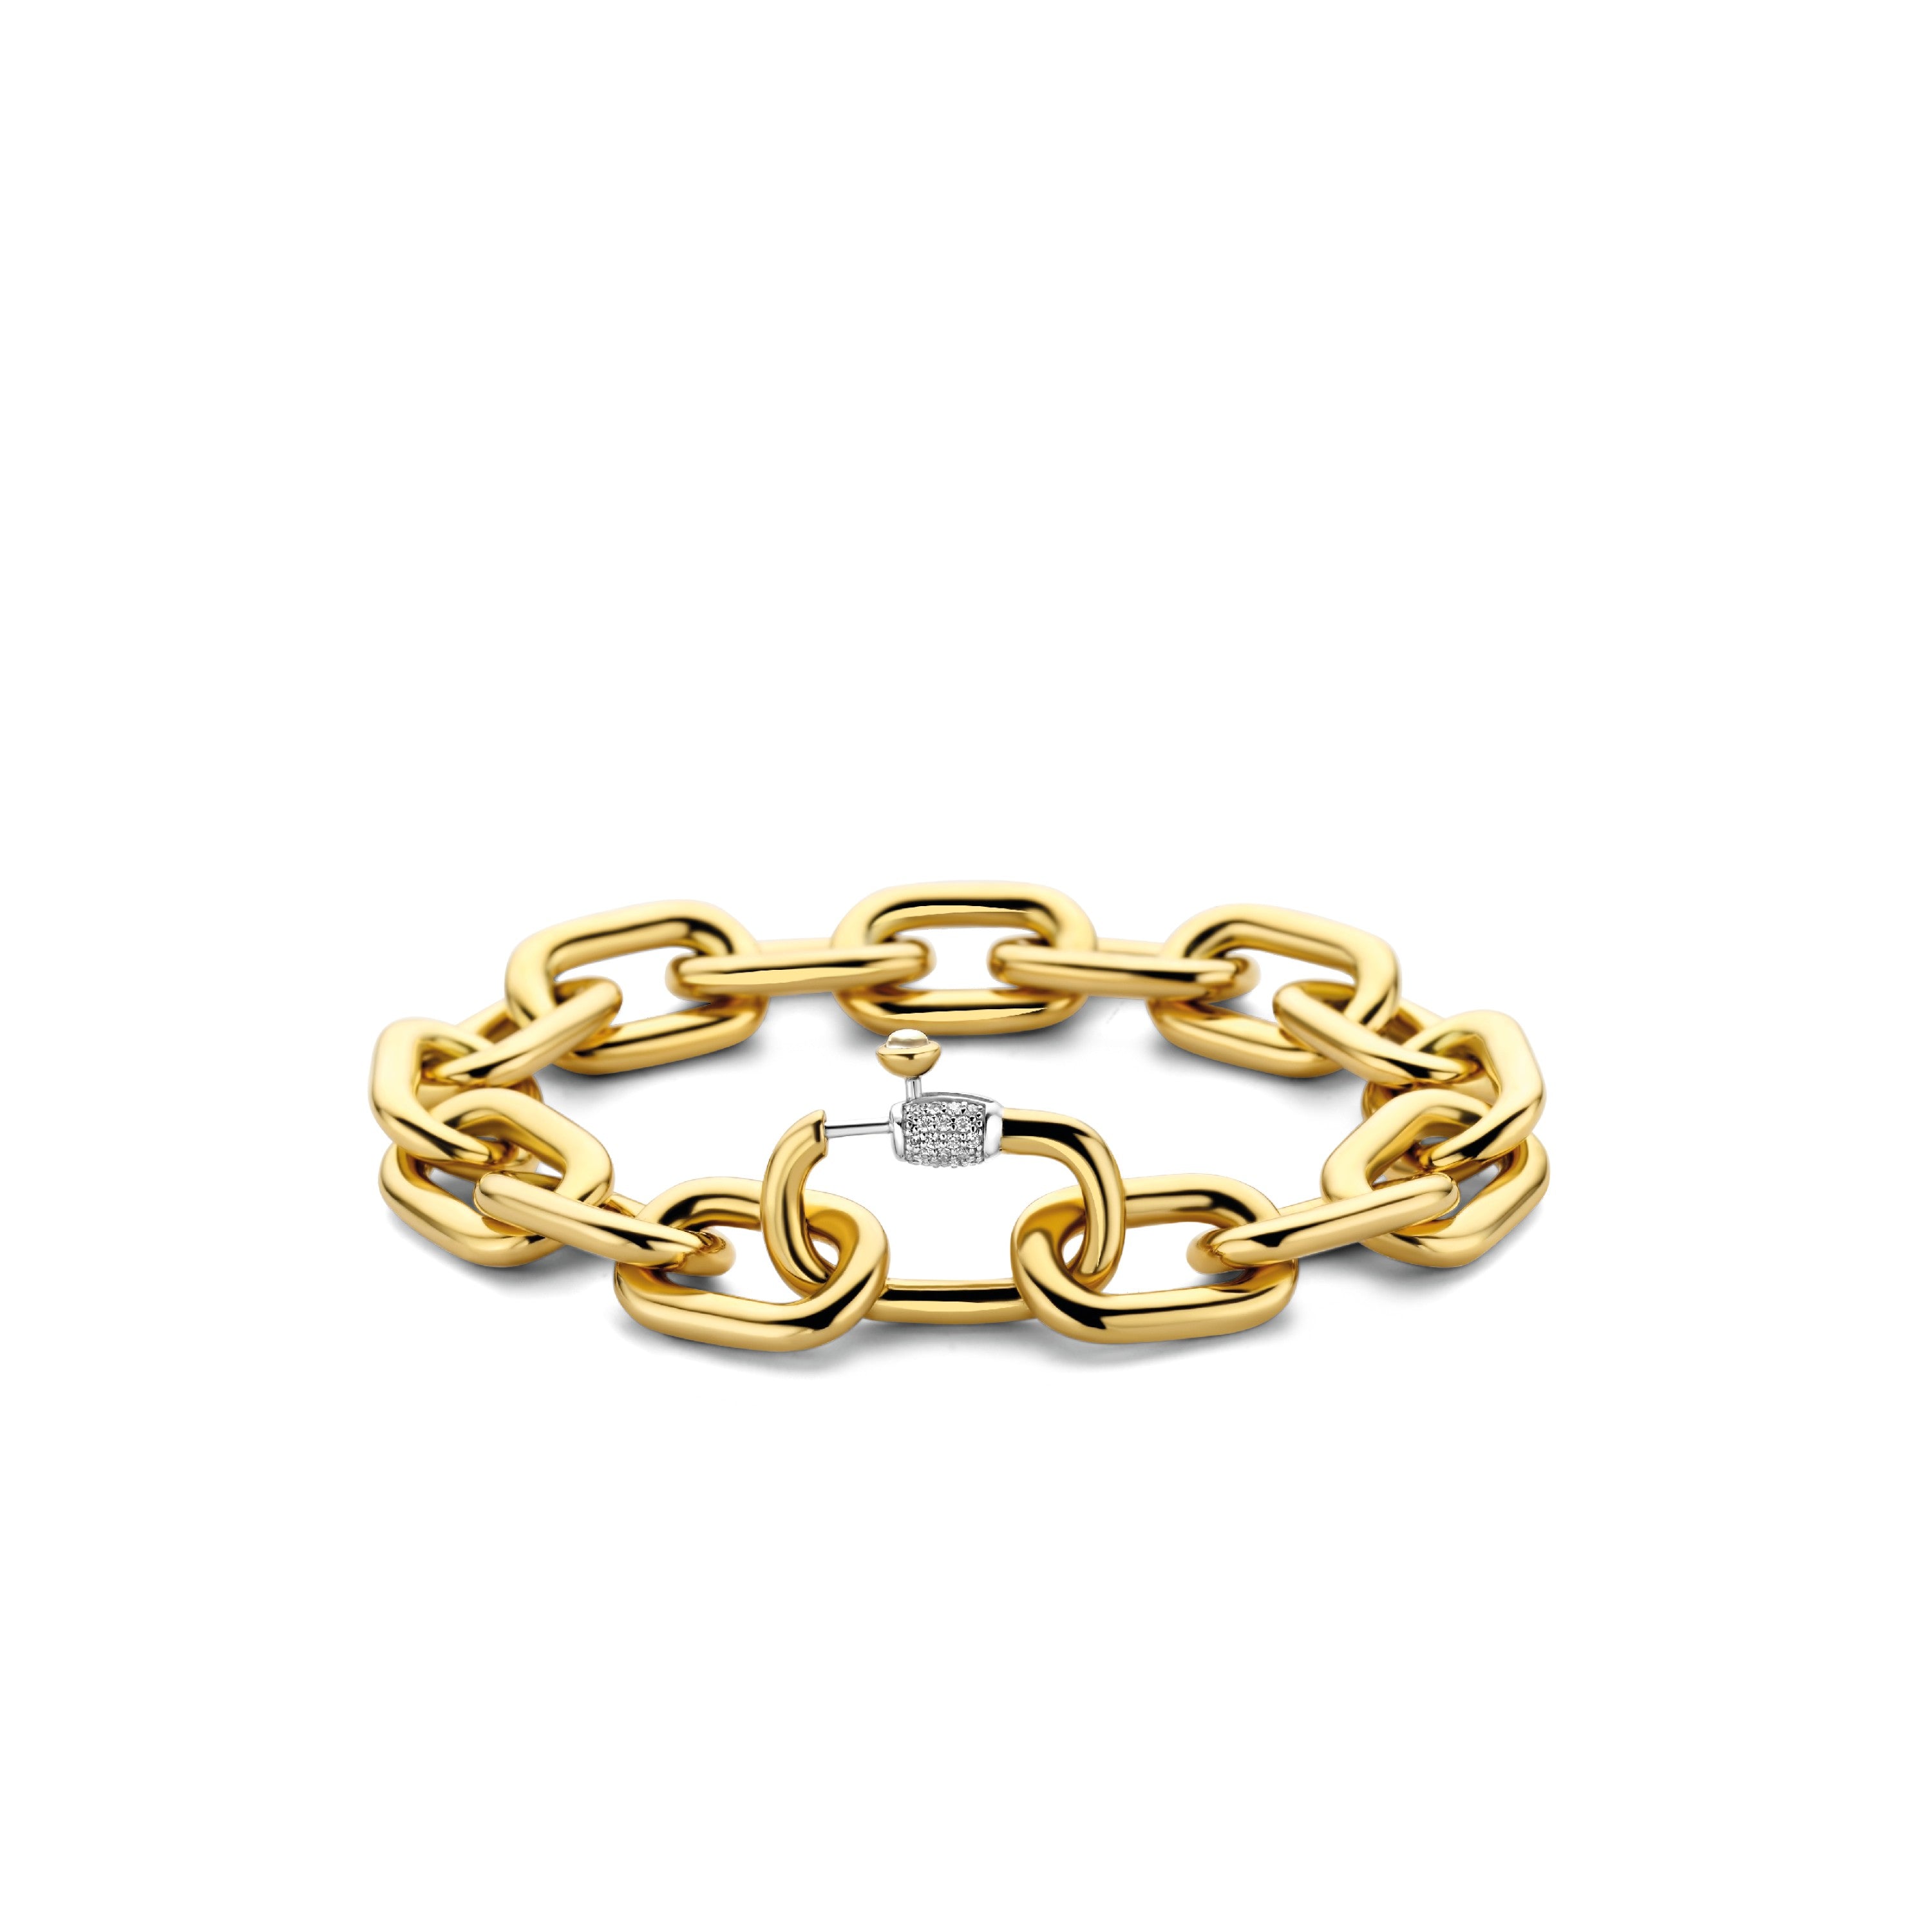 Tisento Milano Sterling Silver gold plated Silver yellow gold platedBracelet